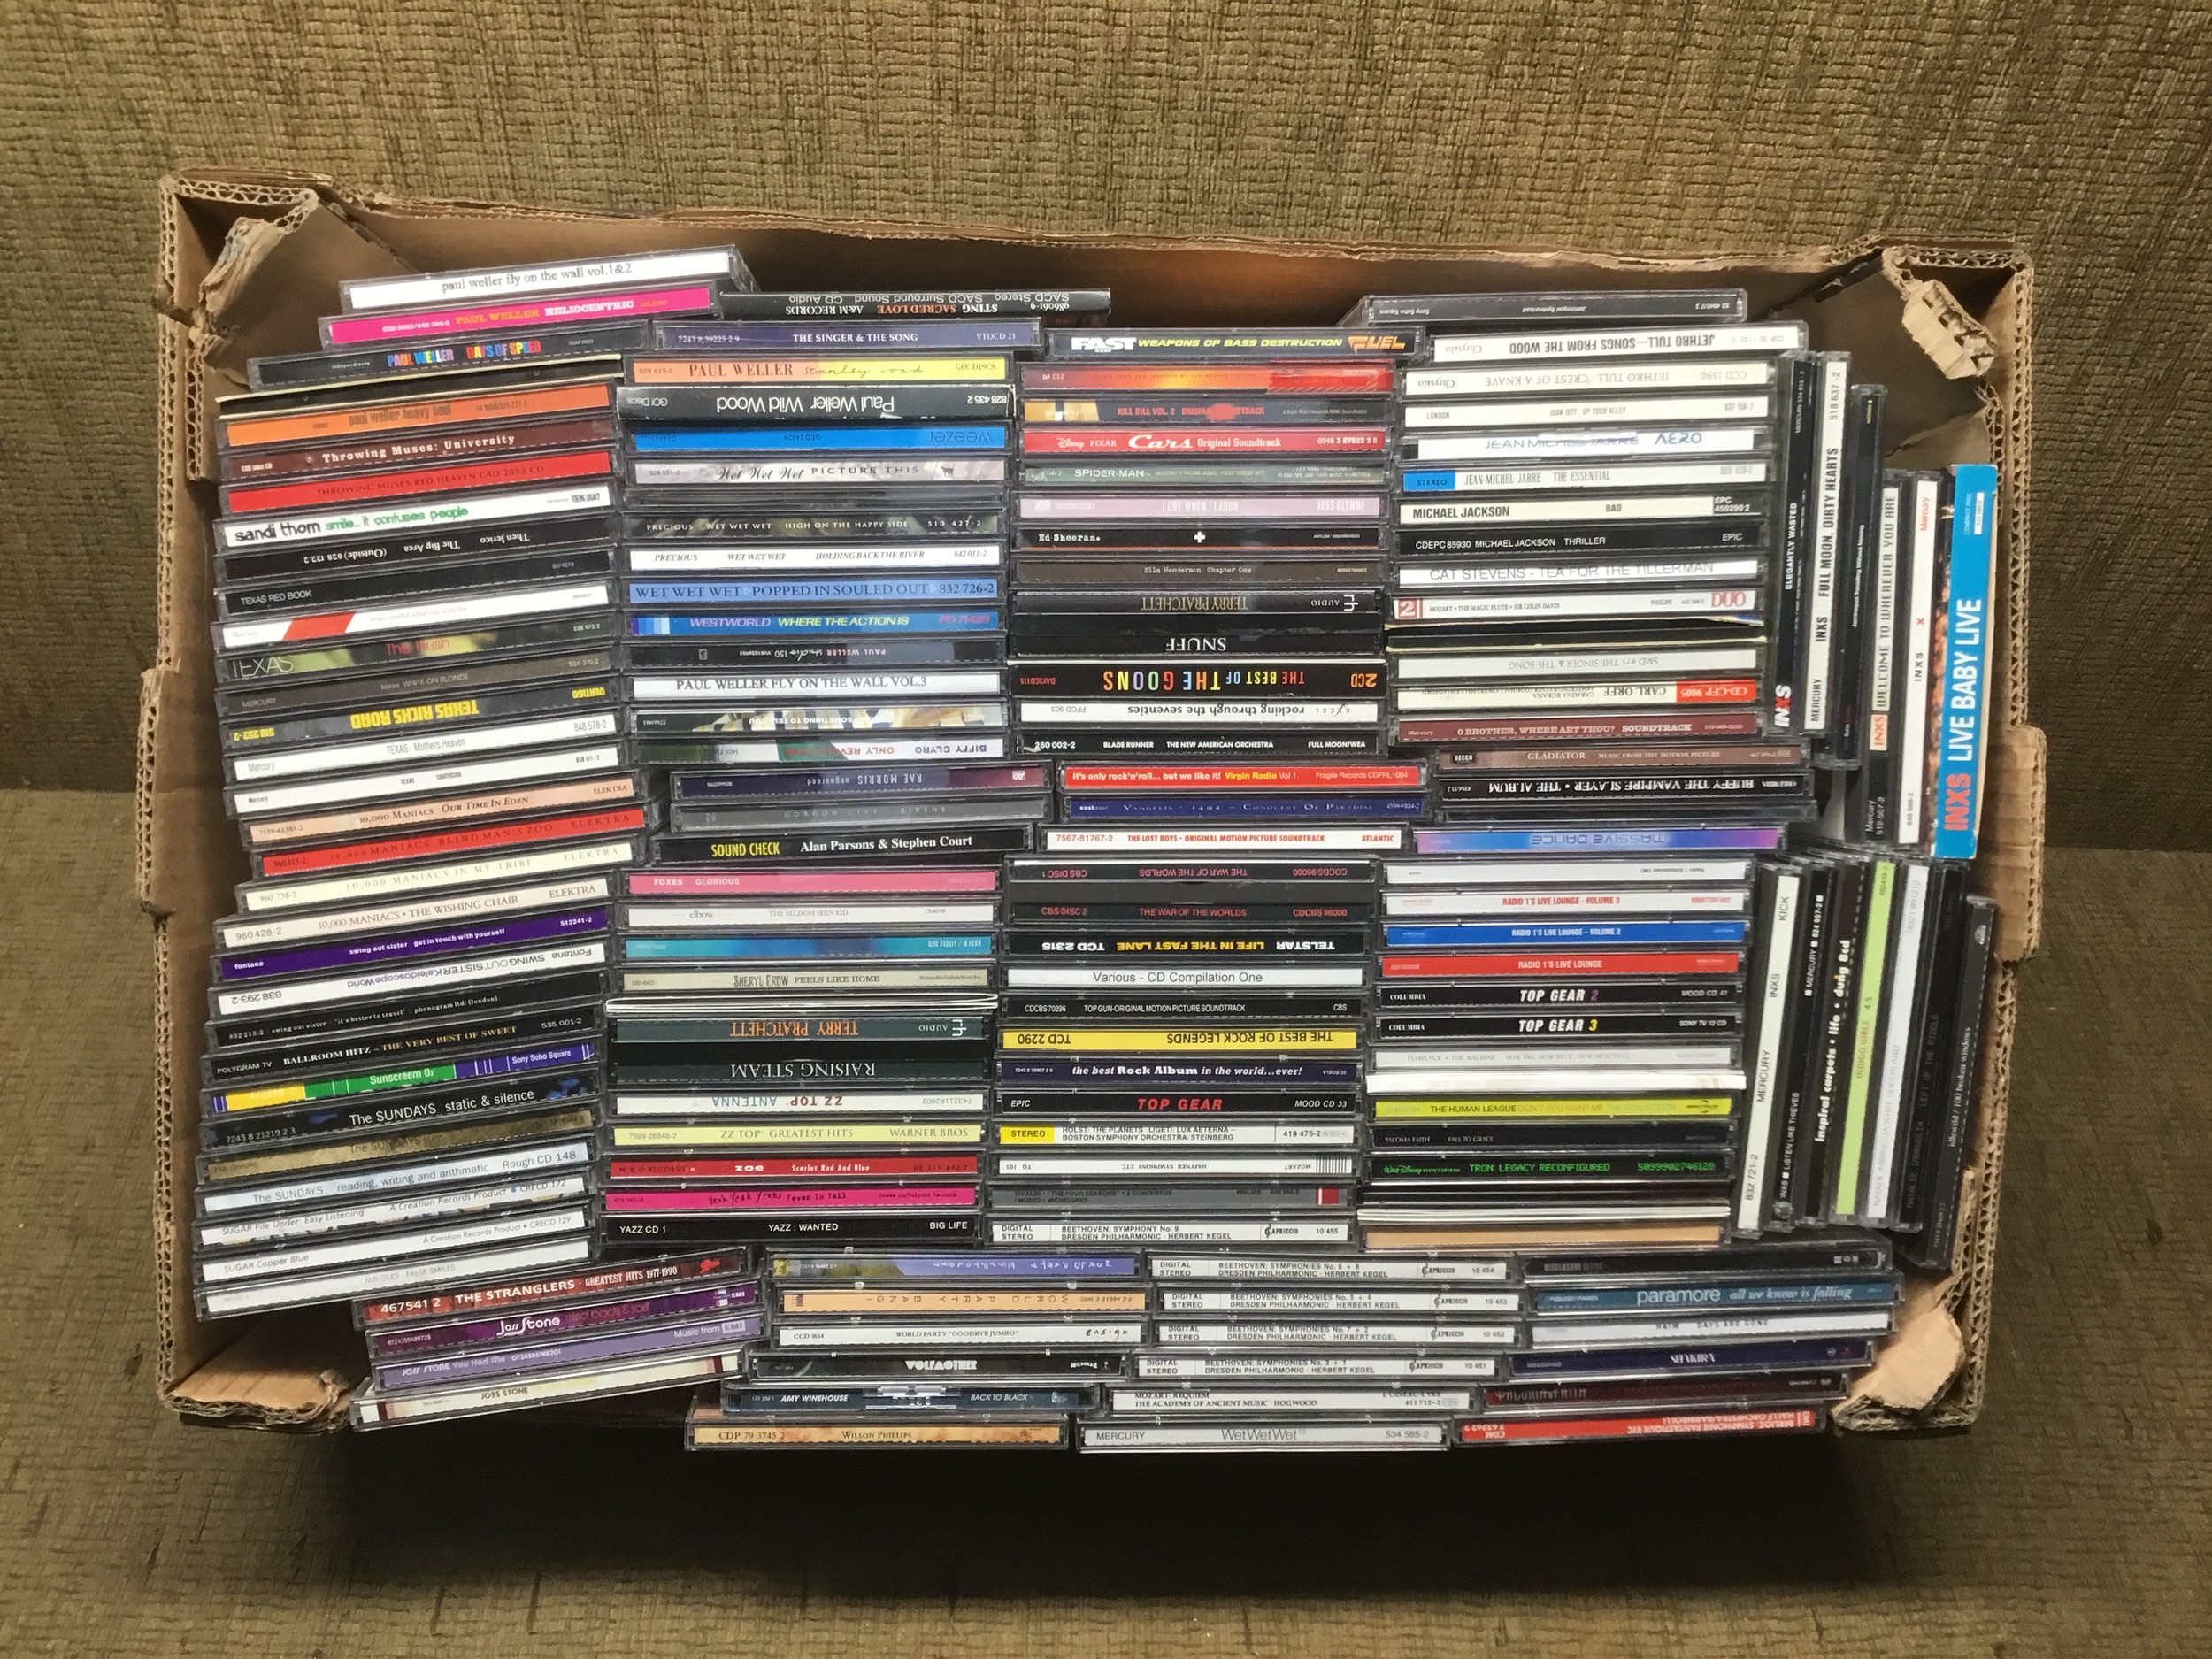 Large collection of modern CDs.